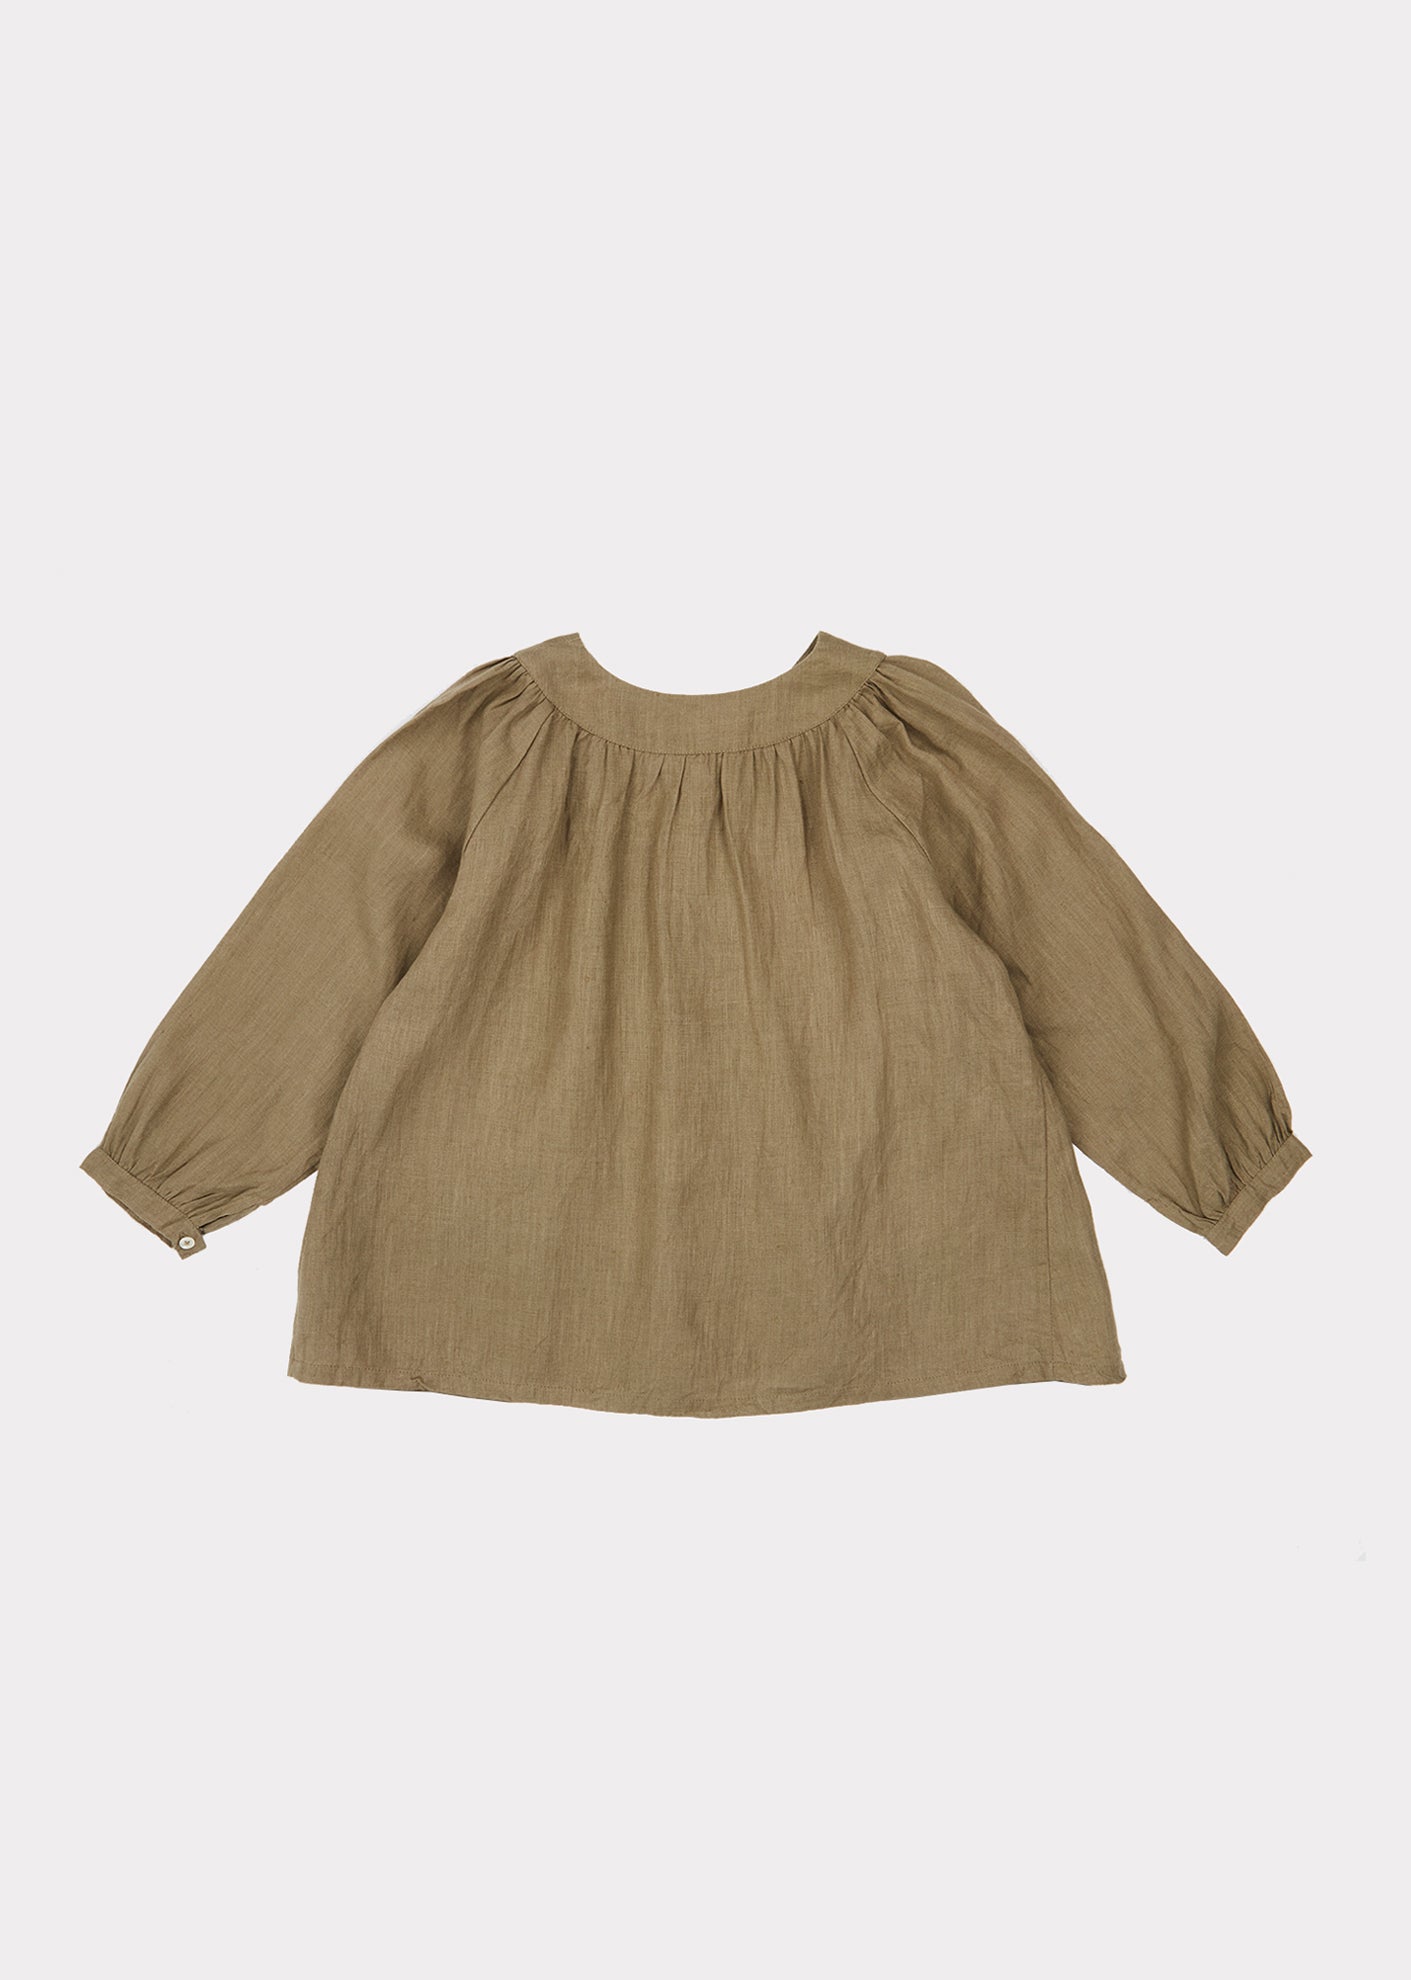 Baby Girls Olive Green Top